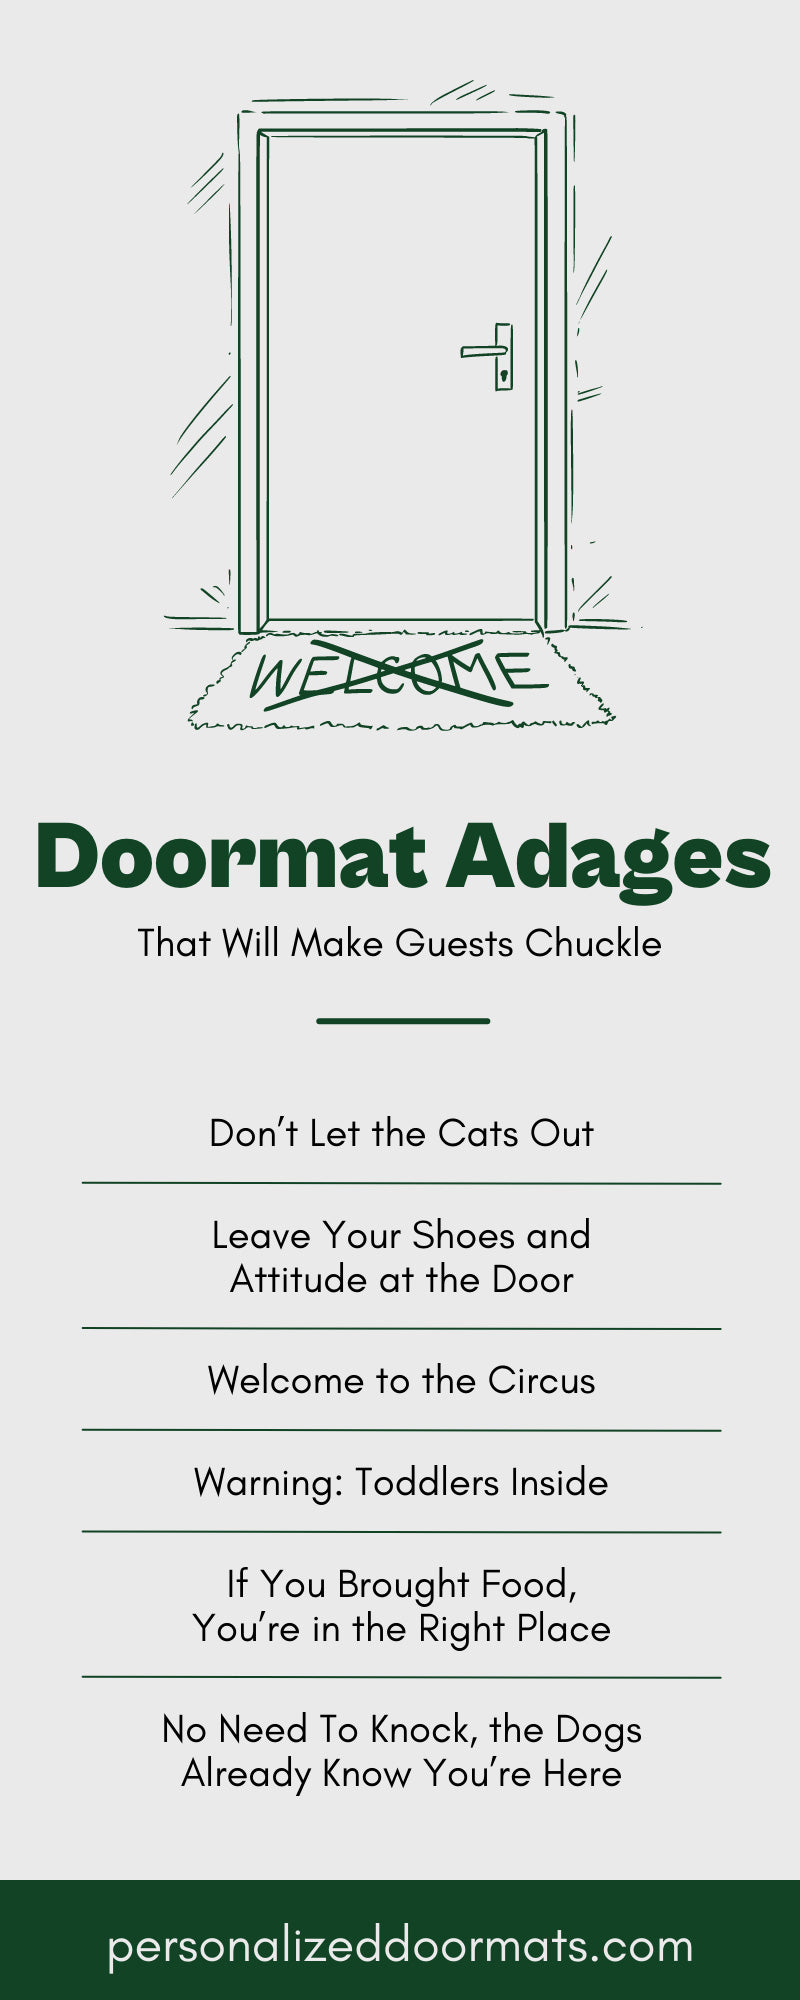 10 Doormat Adages That Will Make Guests Chuckle